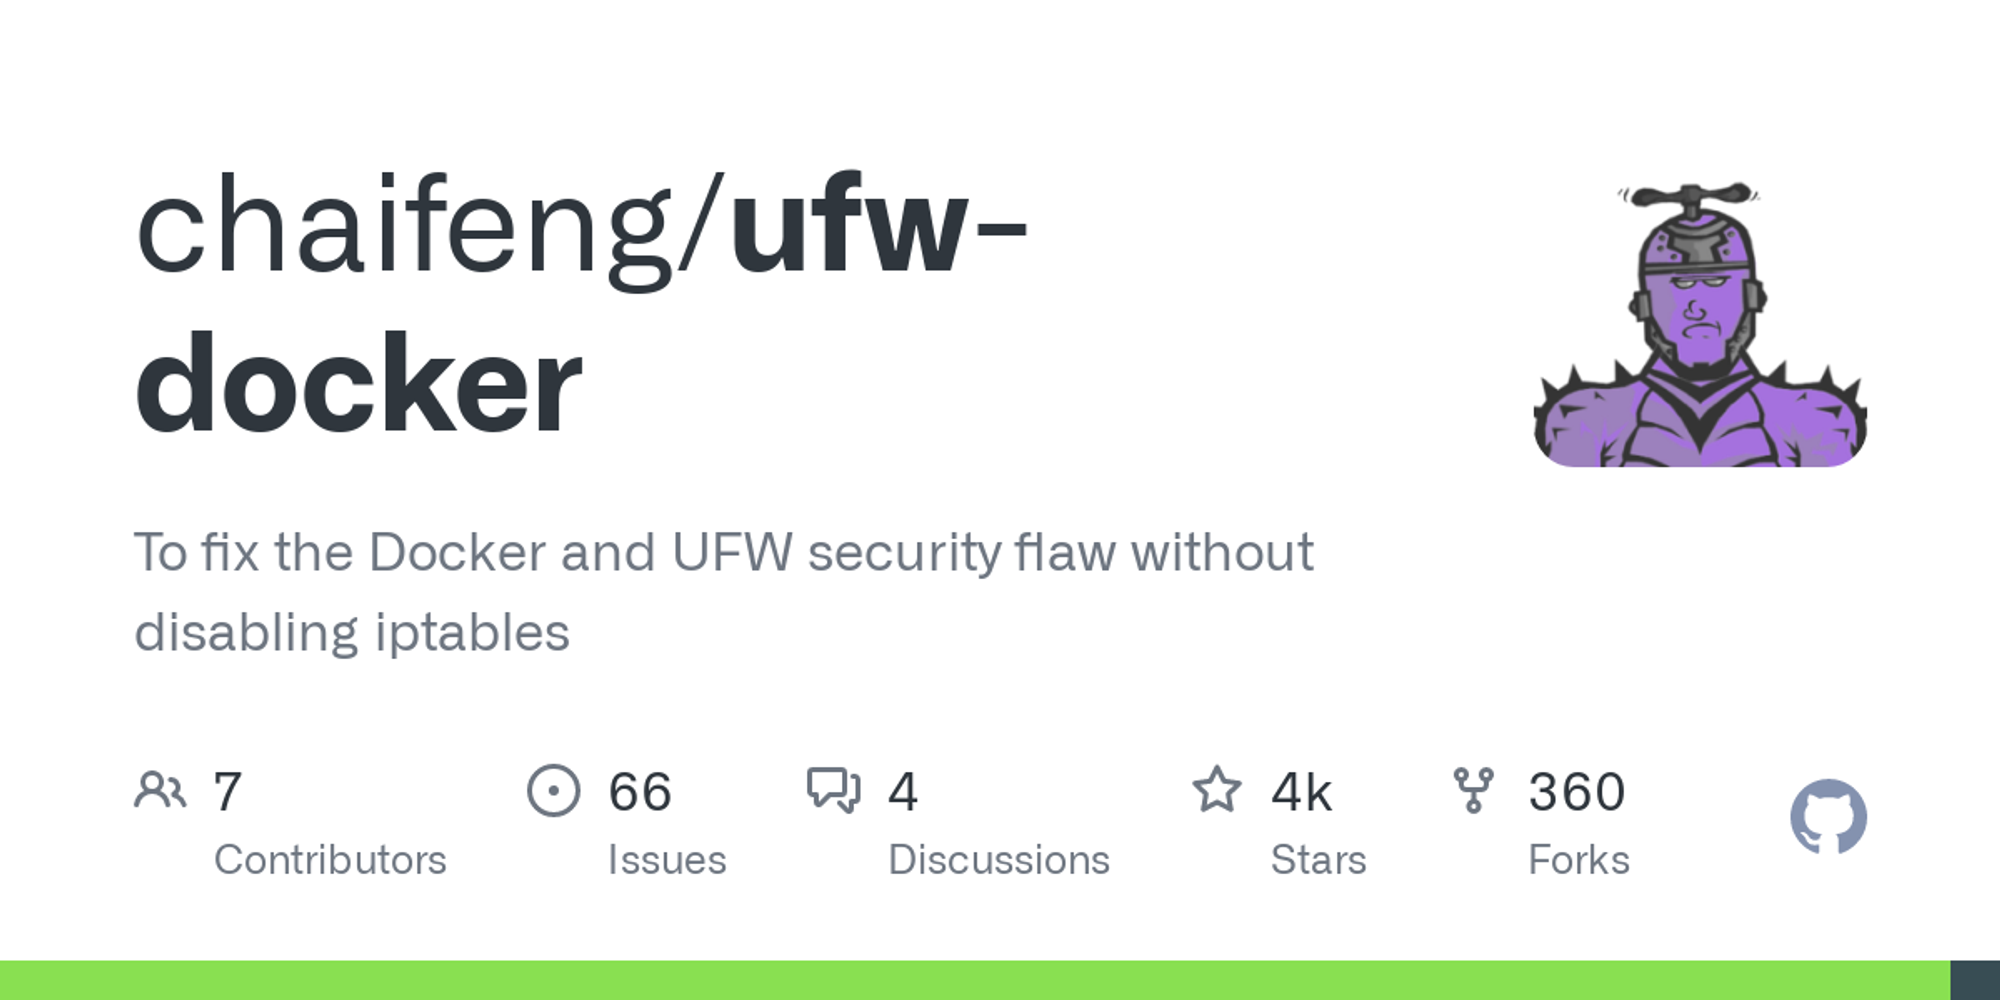 GitHub - chaifeng/ufw-docker: To fix the Docker and UFW security flaw without disabling iptables